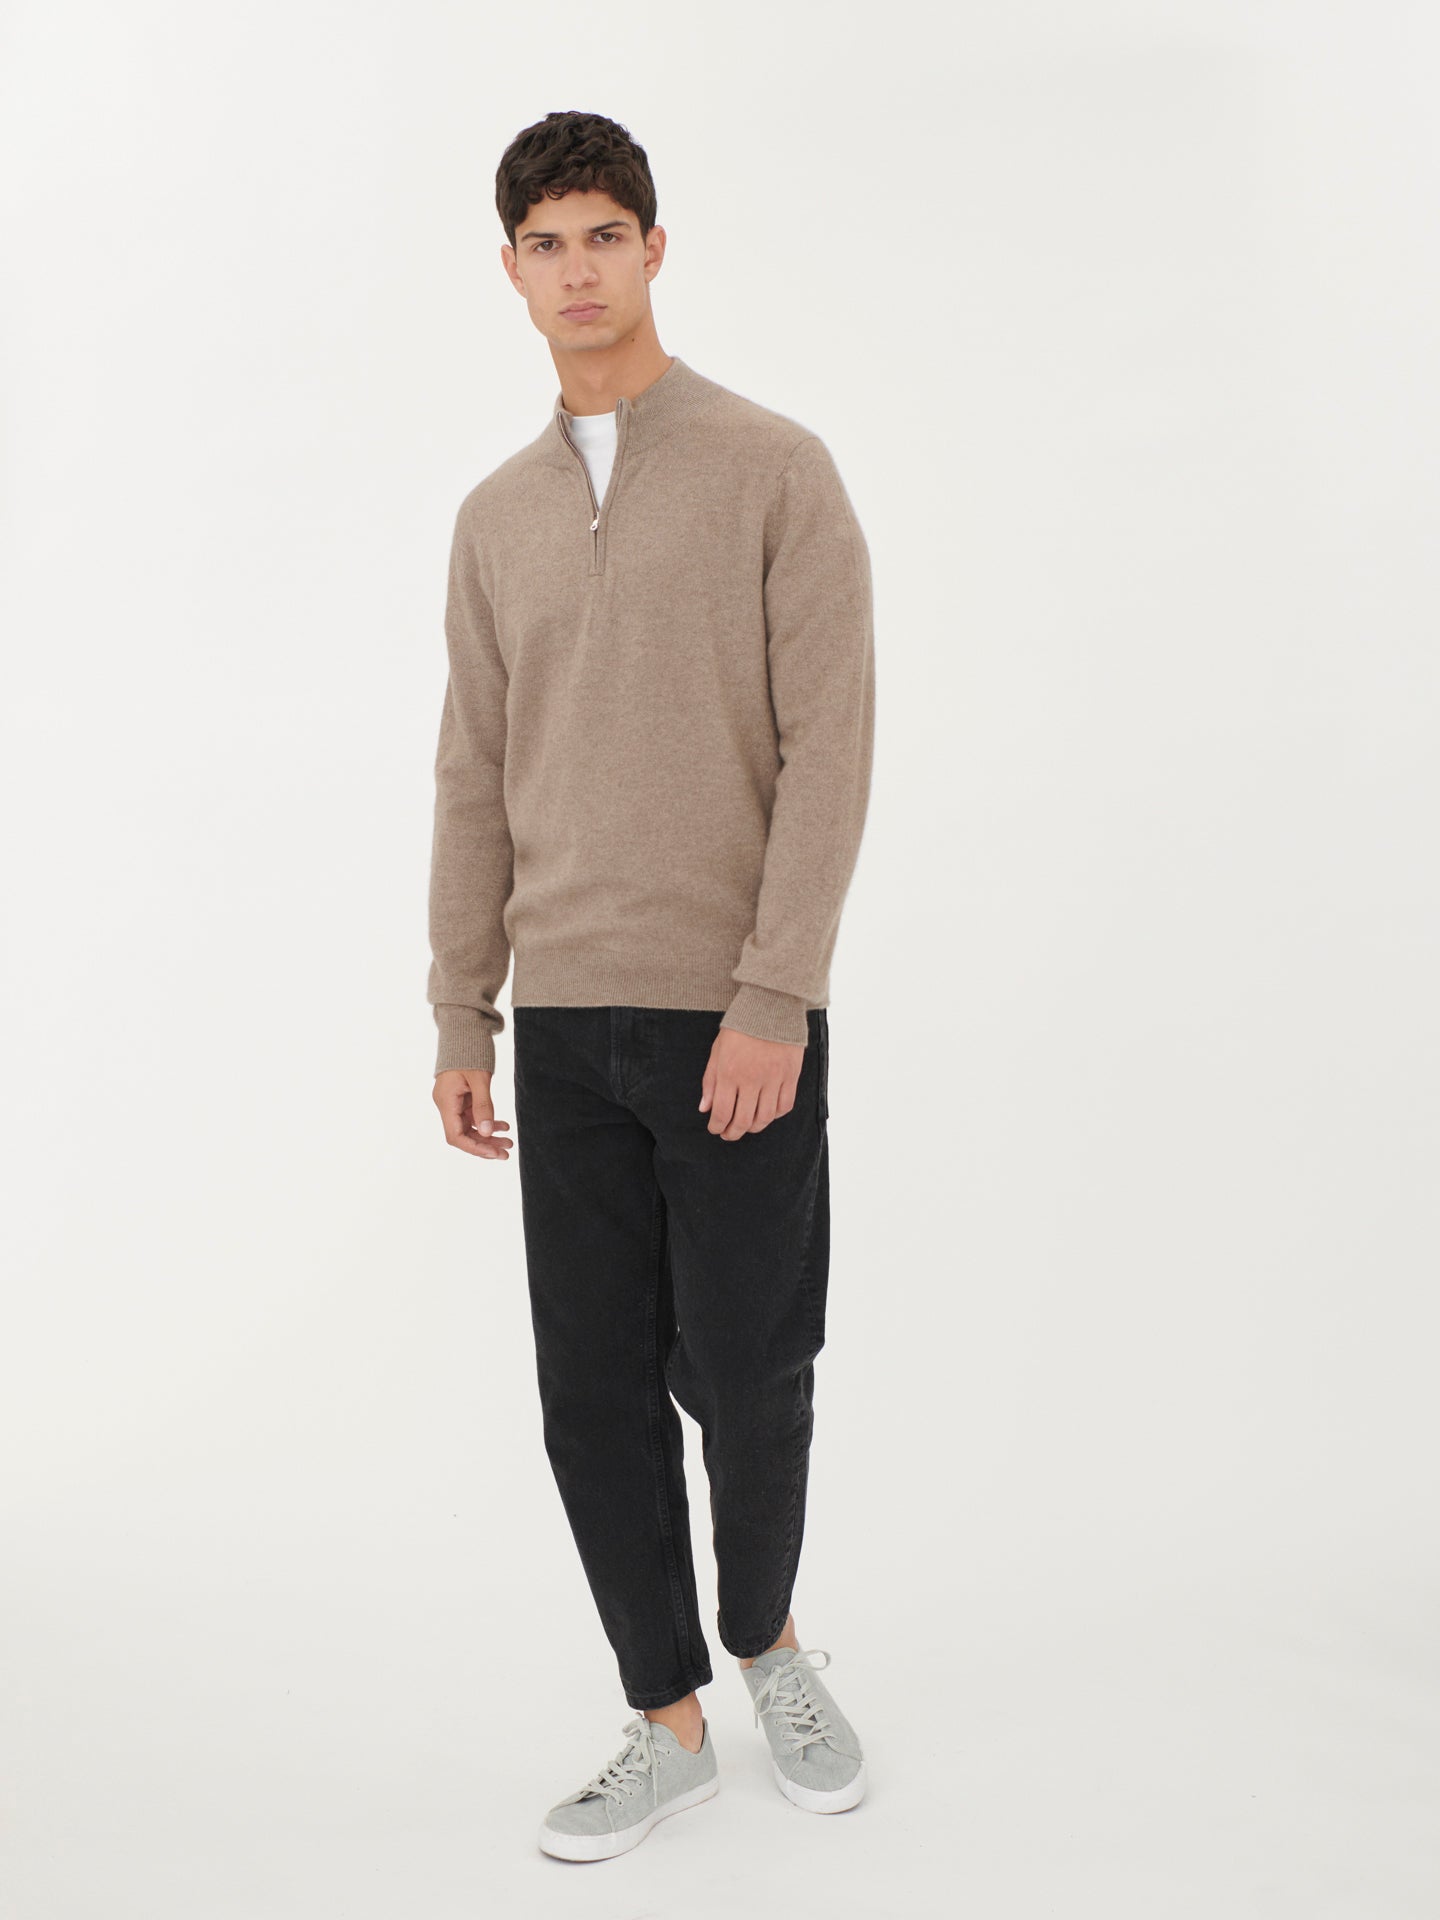 Experience Comfort with Men's Organic Cashmere | GOBI Cashmere